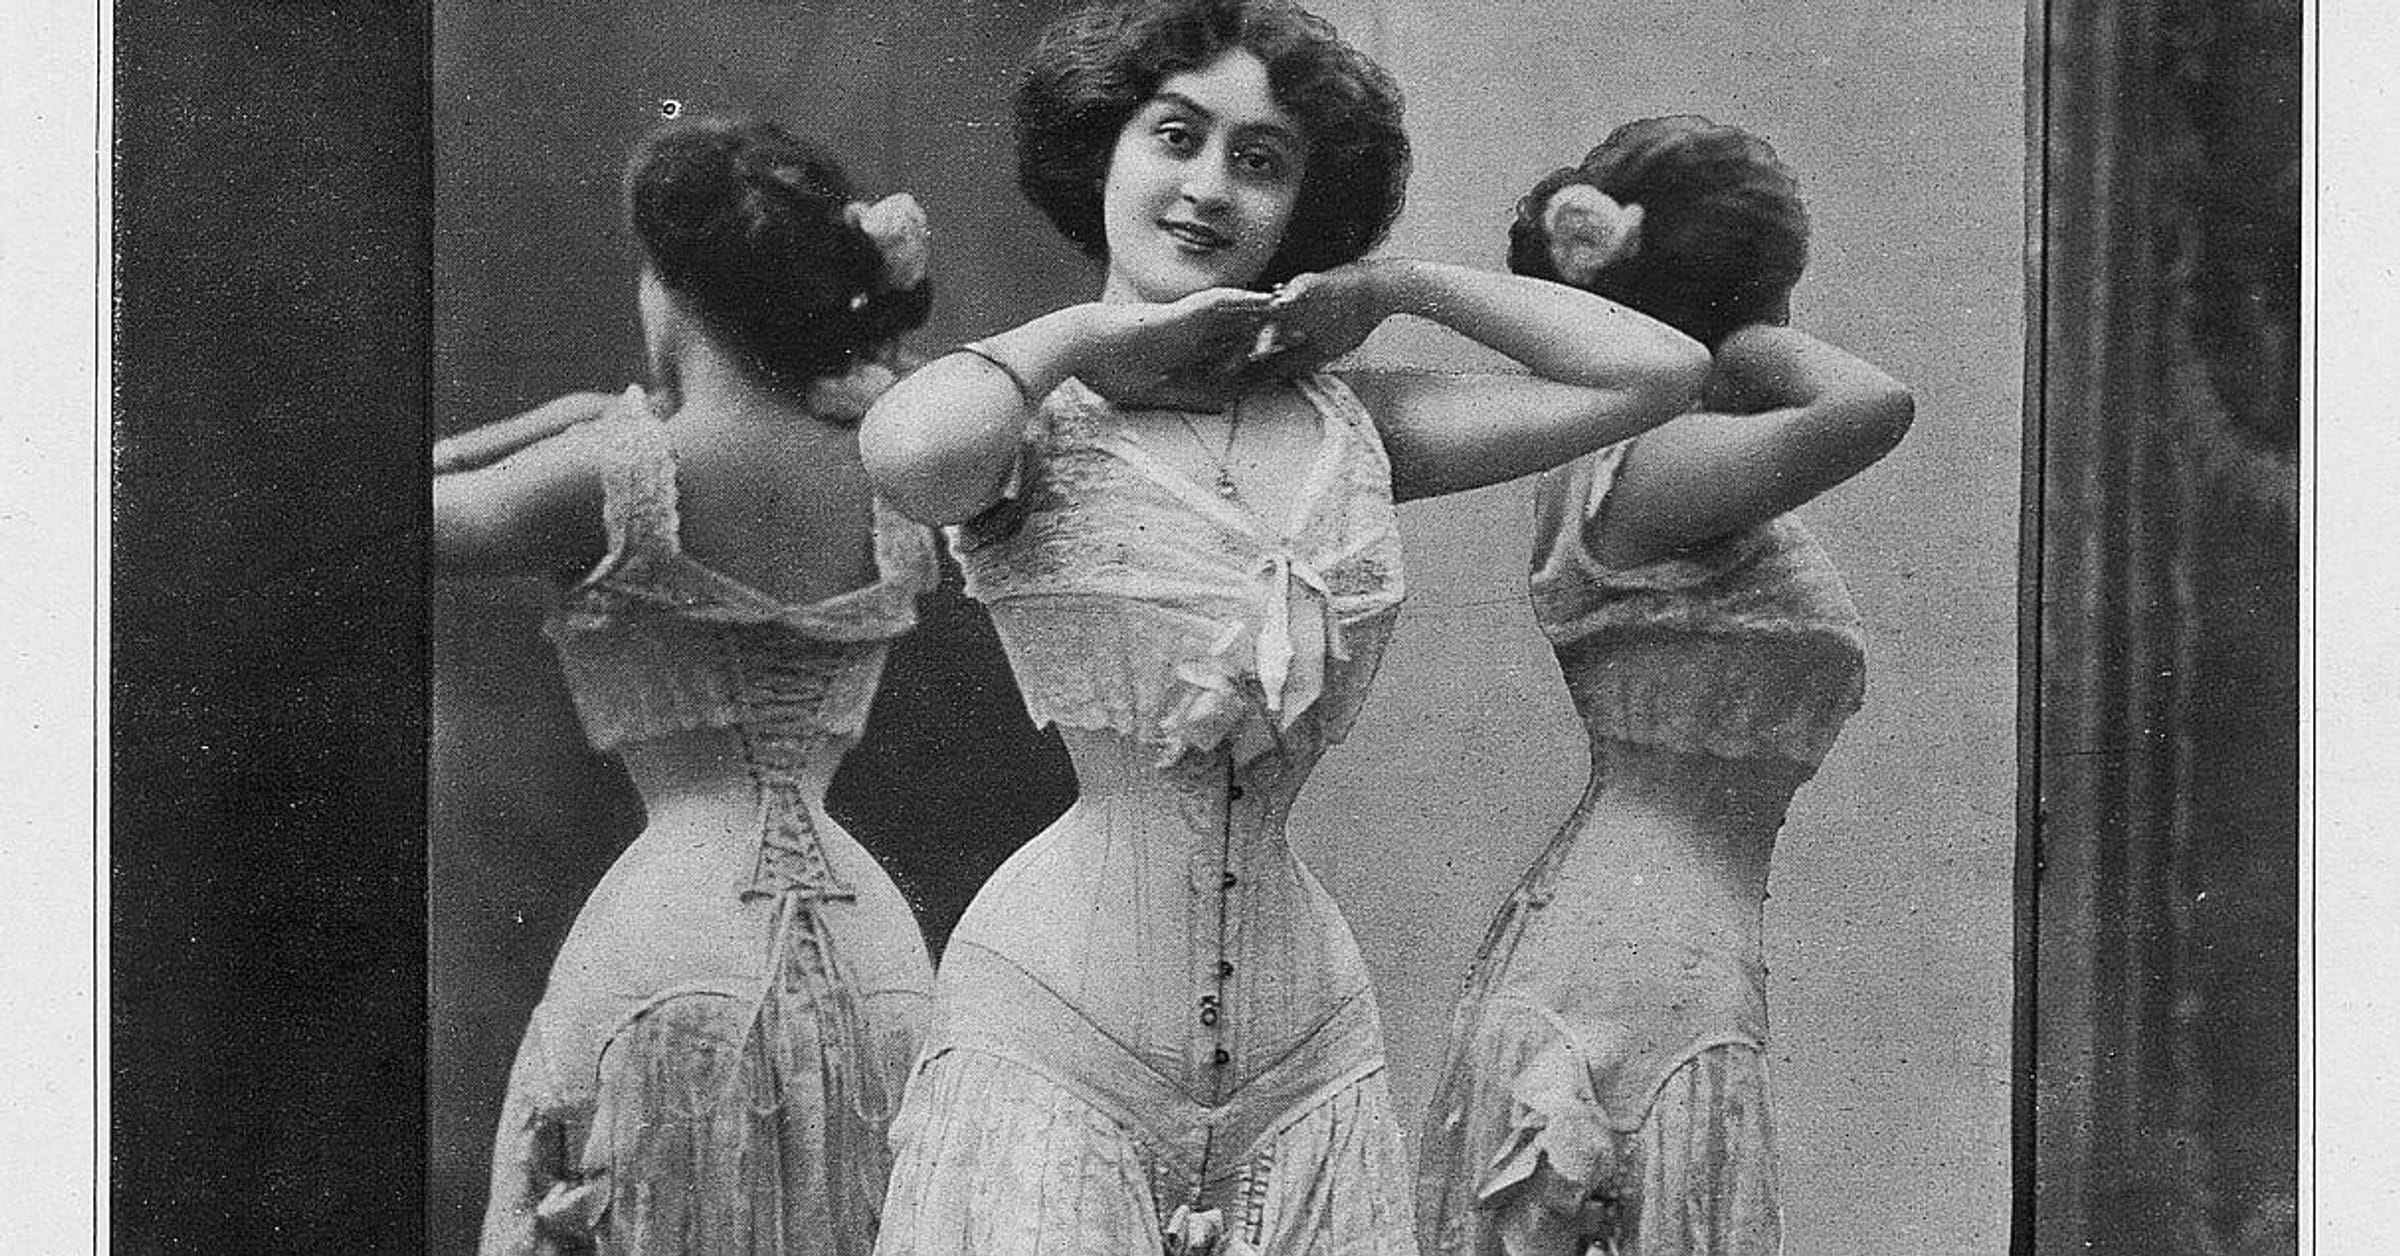 Fashion History: Corsets Continue to Trend